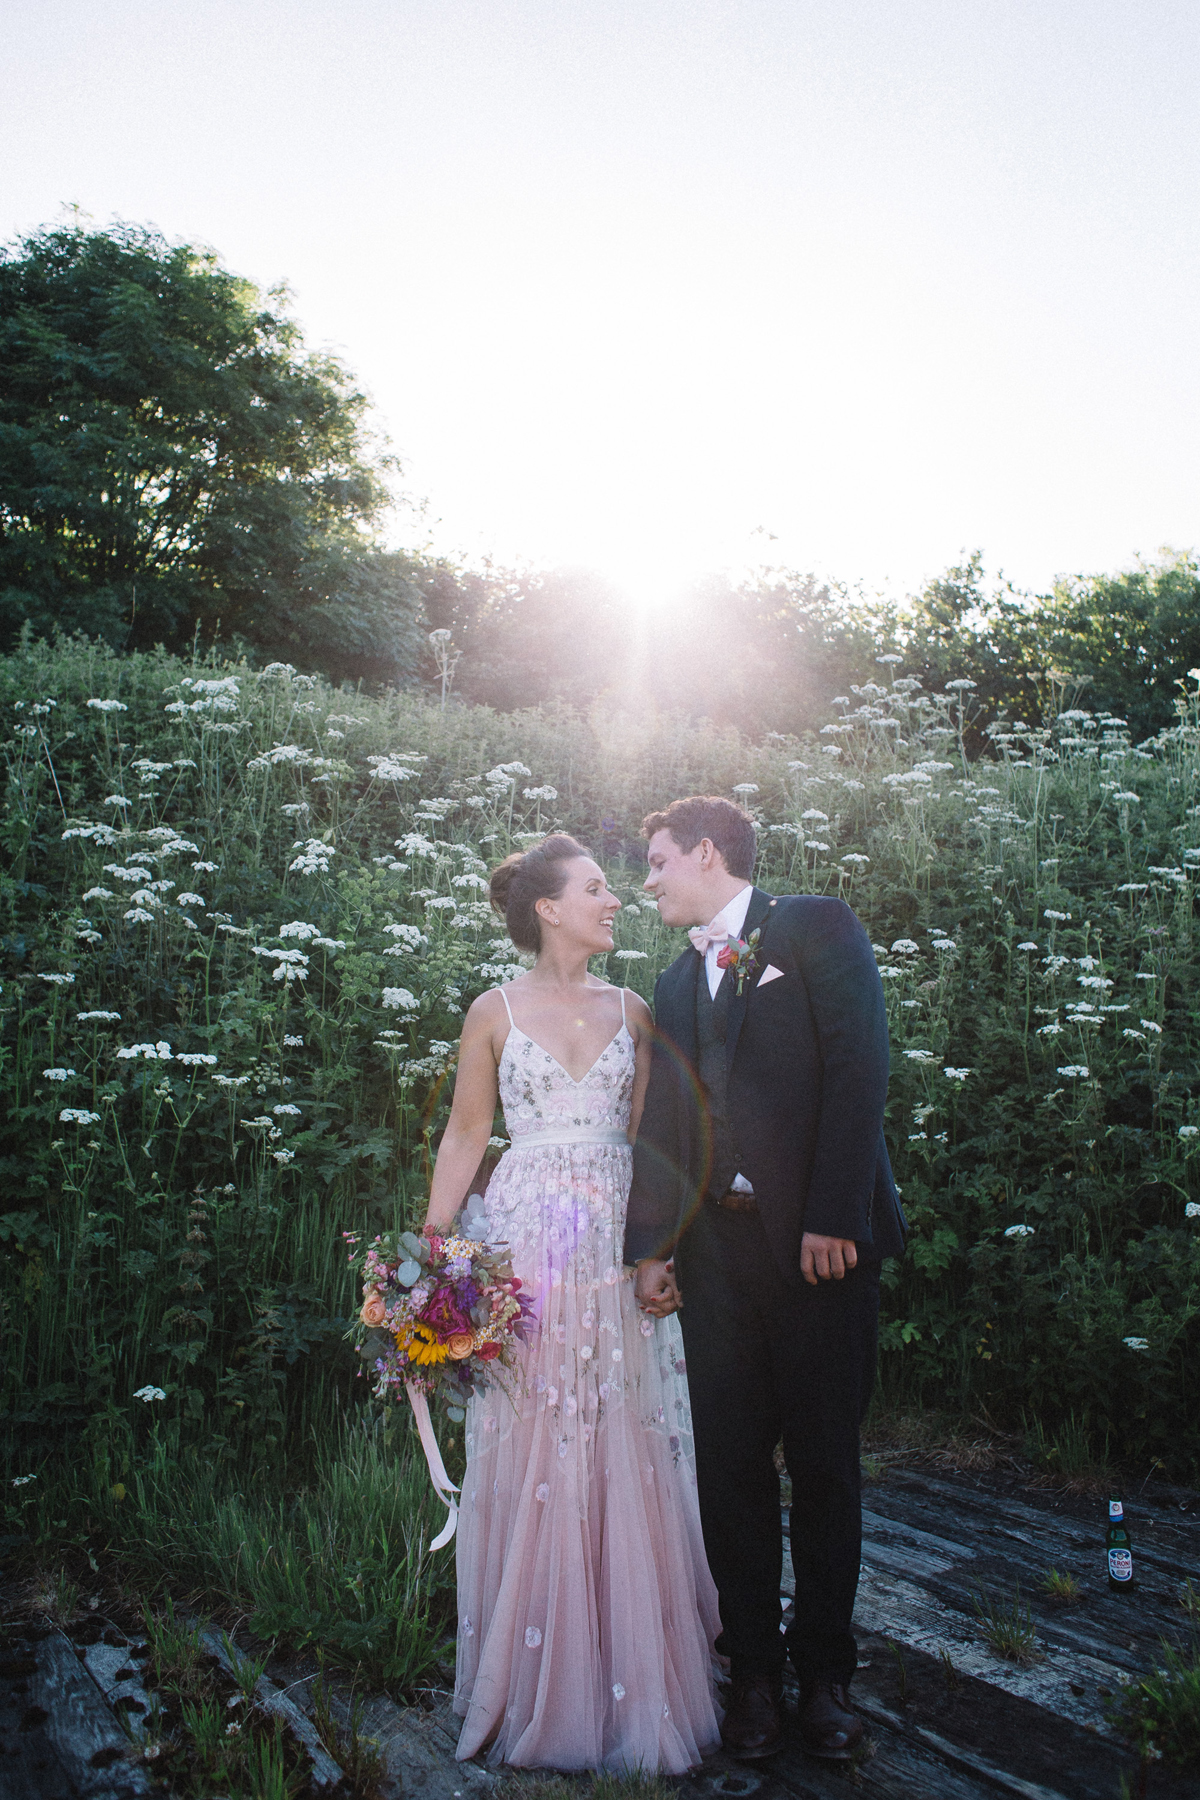 A pink A line floral wedding dress with floral appliques and embellishments, with a V neckline and spaghetti straps